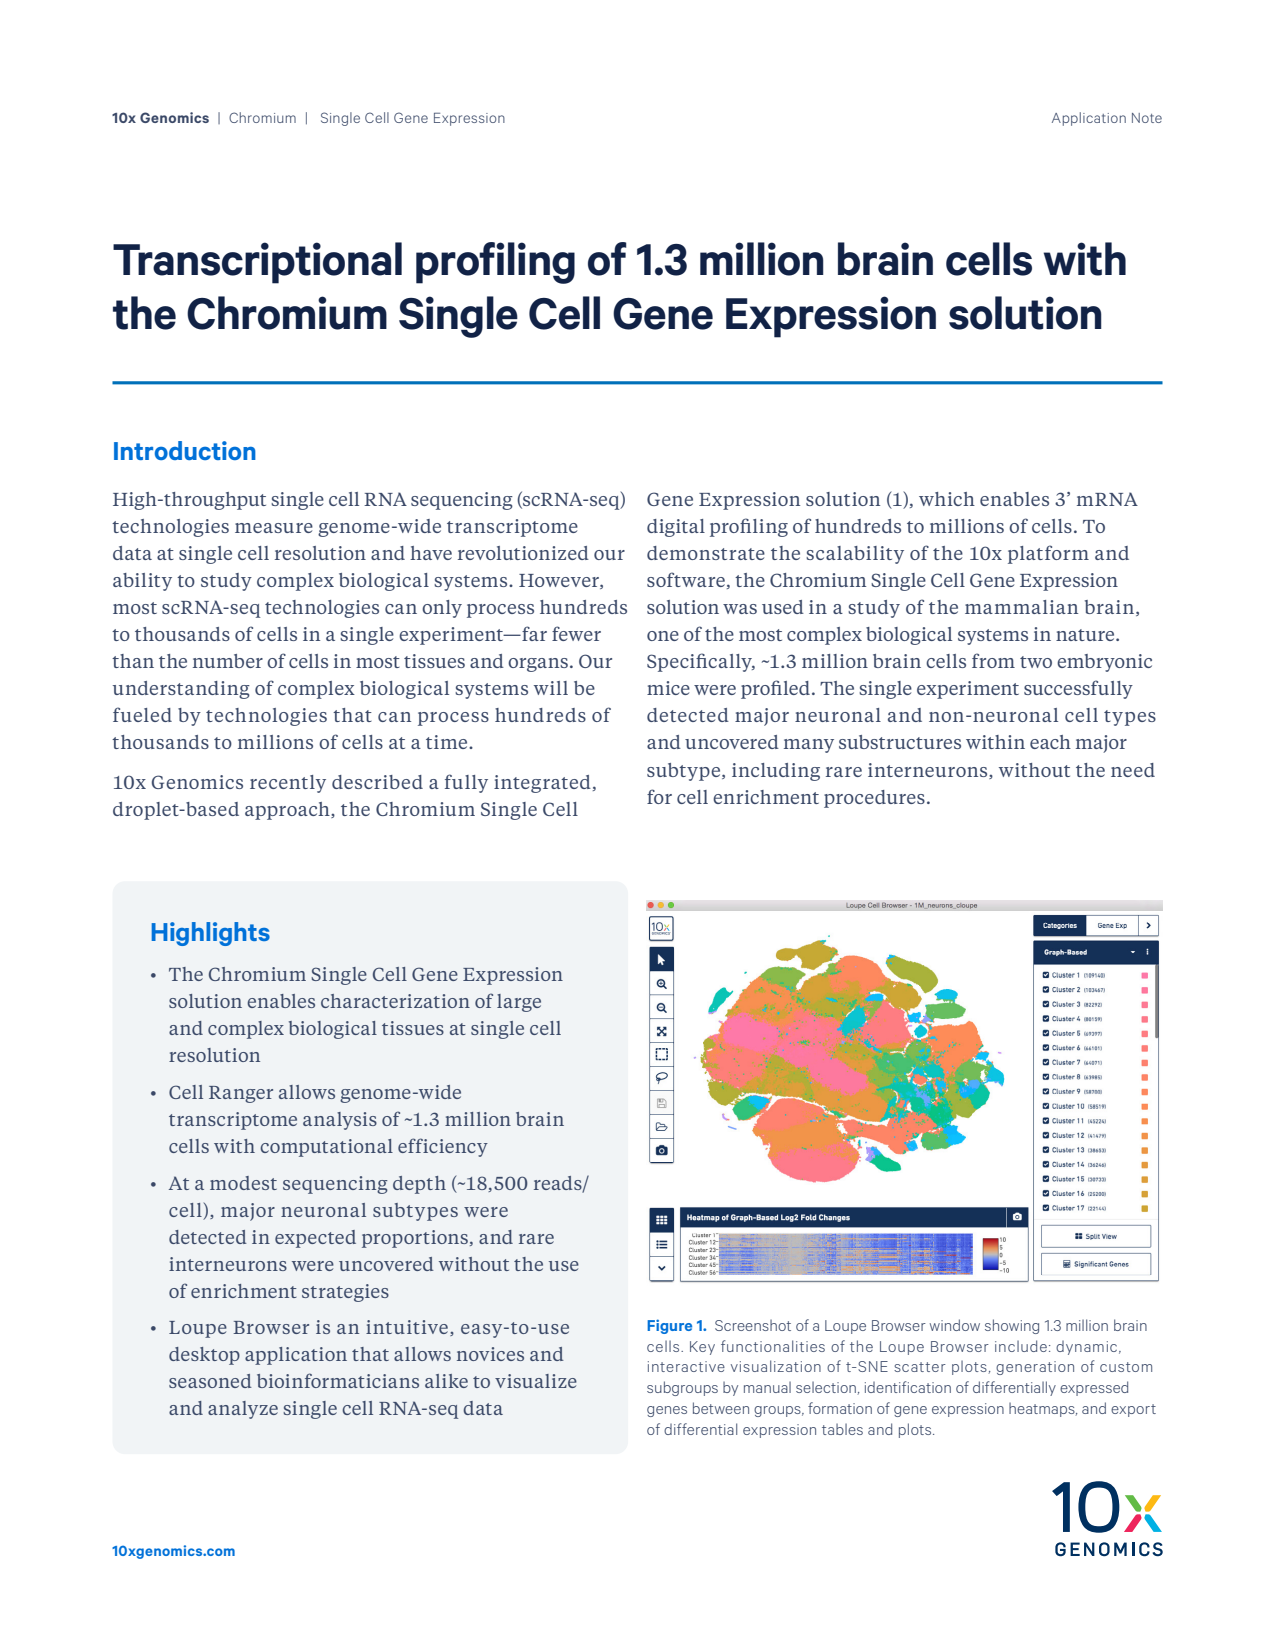 Transcriptional Profiling of 1.3 Million Brain Cells with the Chromium Single Cell Gene Expression Solution